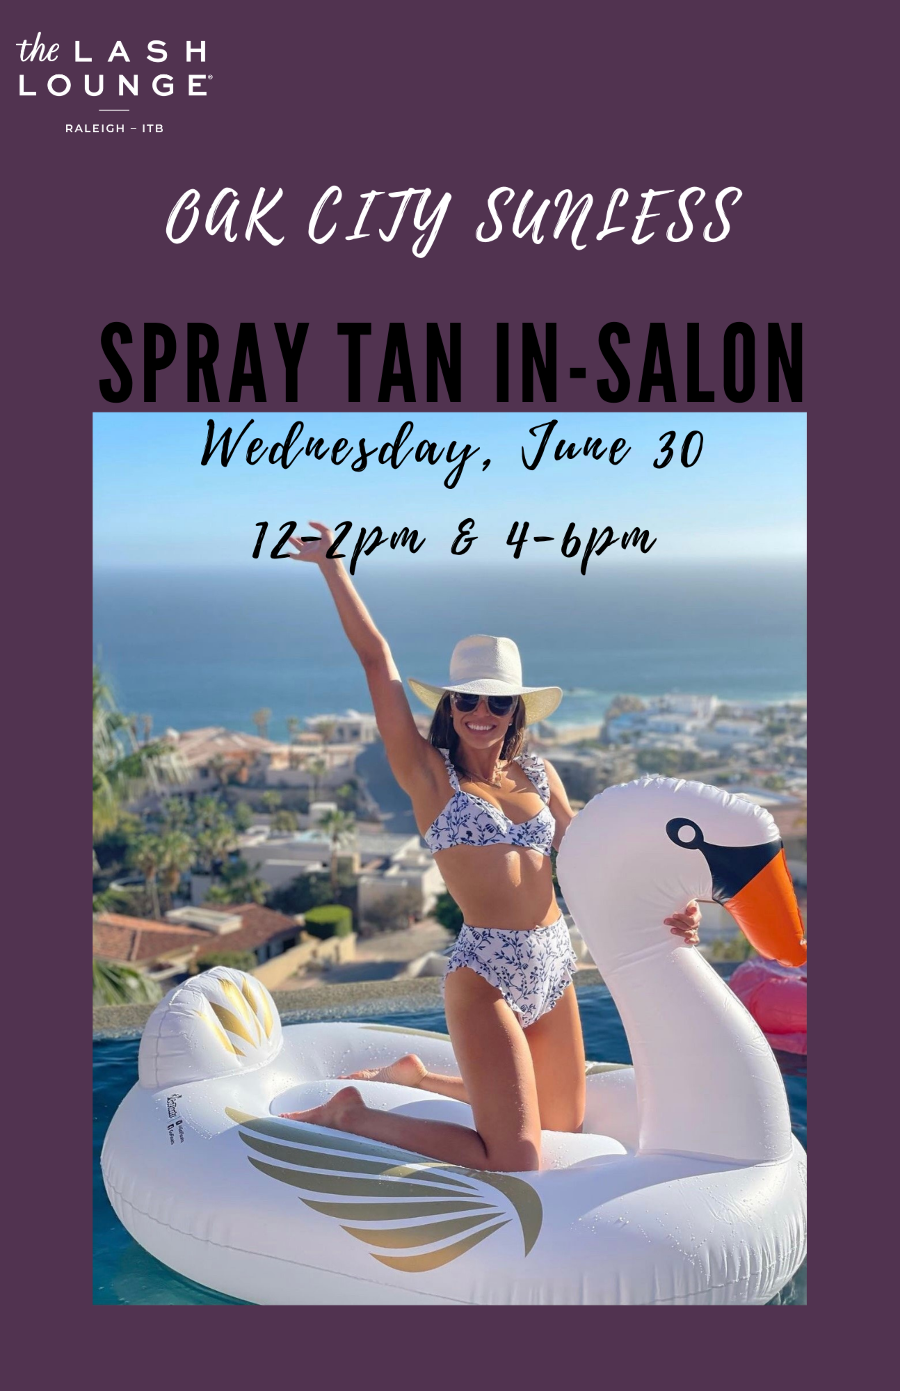 June Spray Tan Event at The Lash Lounge